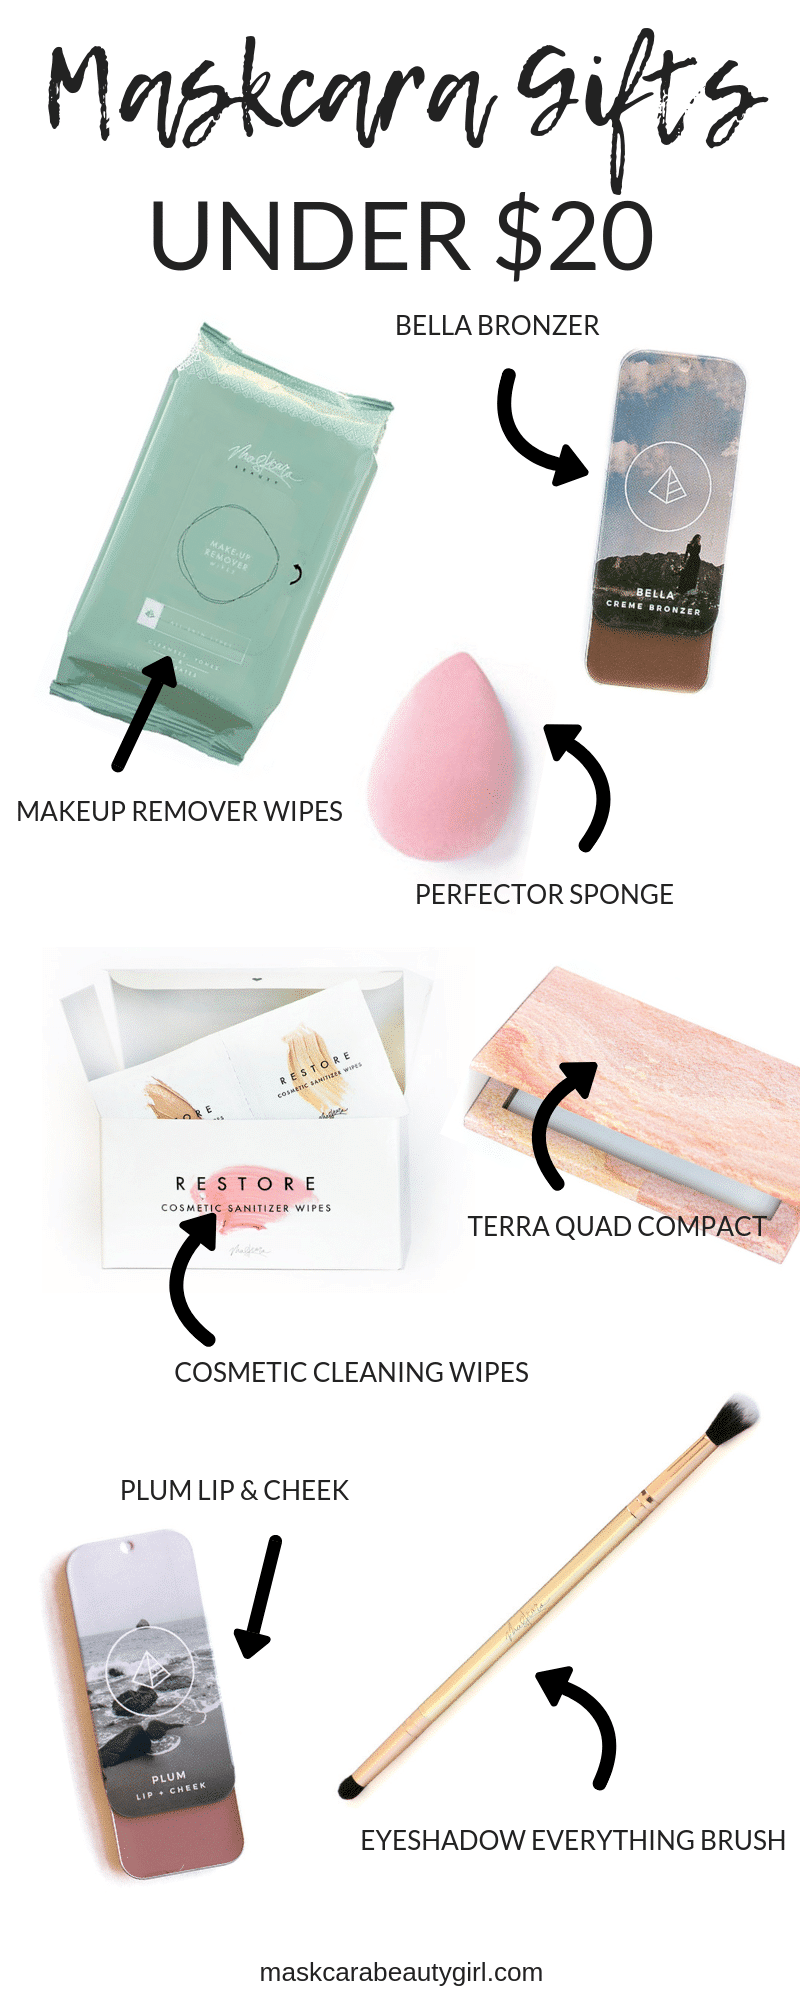 The Best Maskcara Gifts for Different Price Points